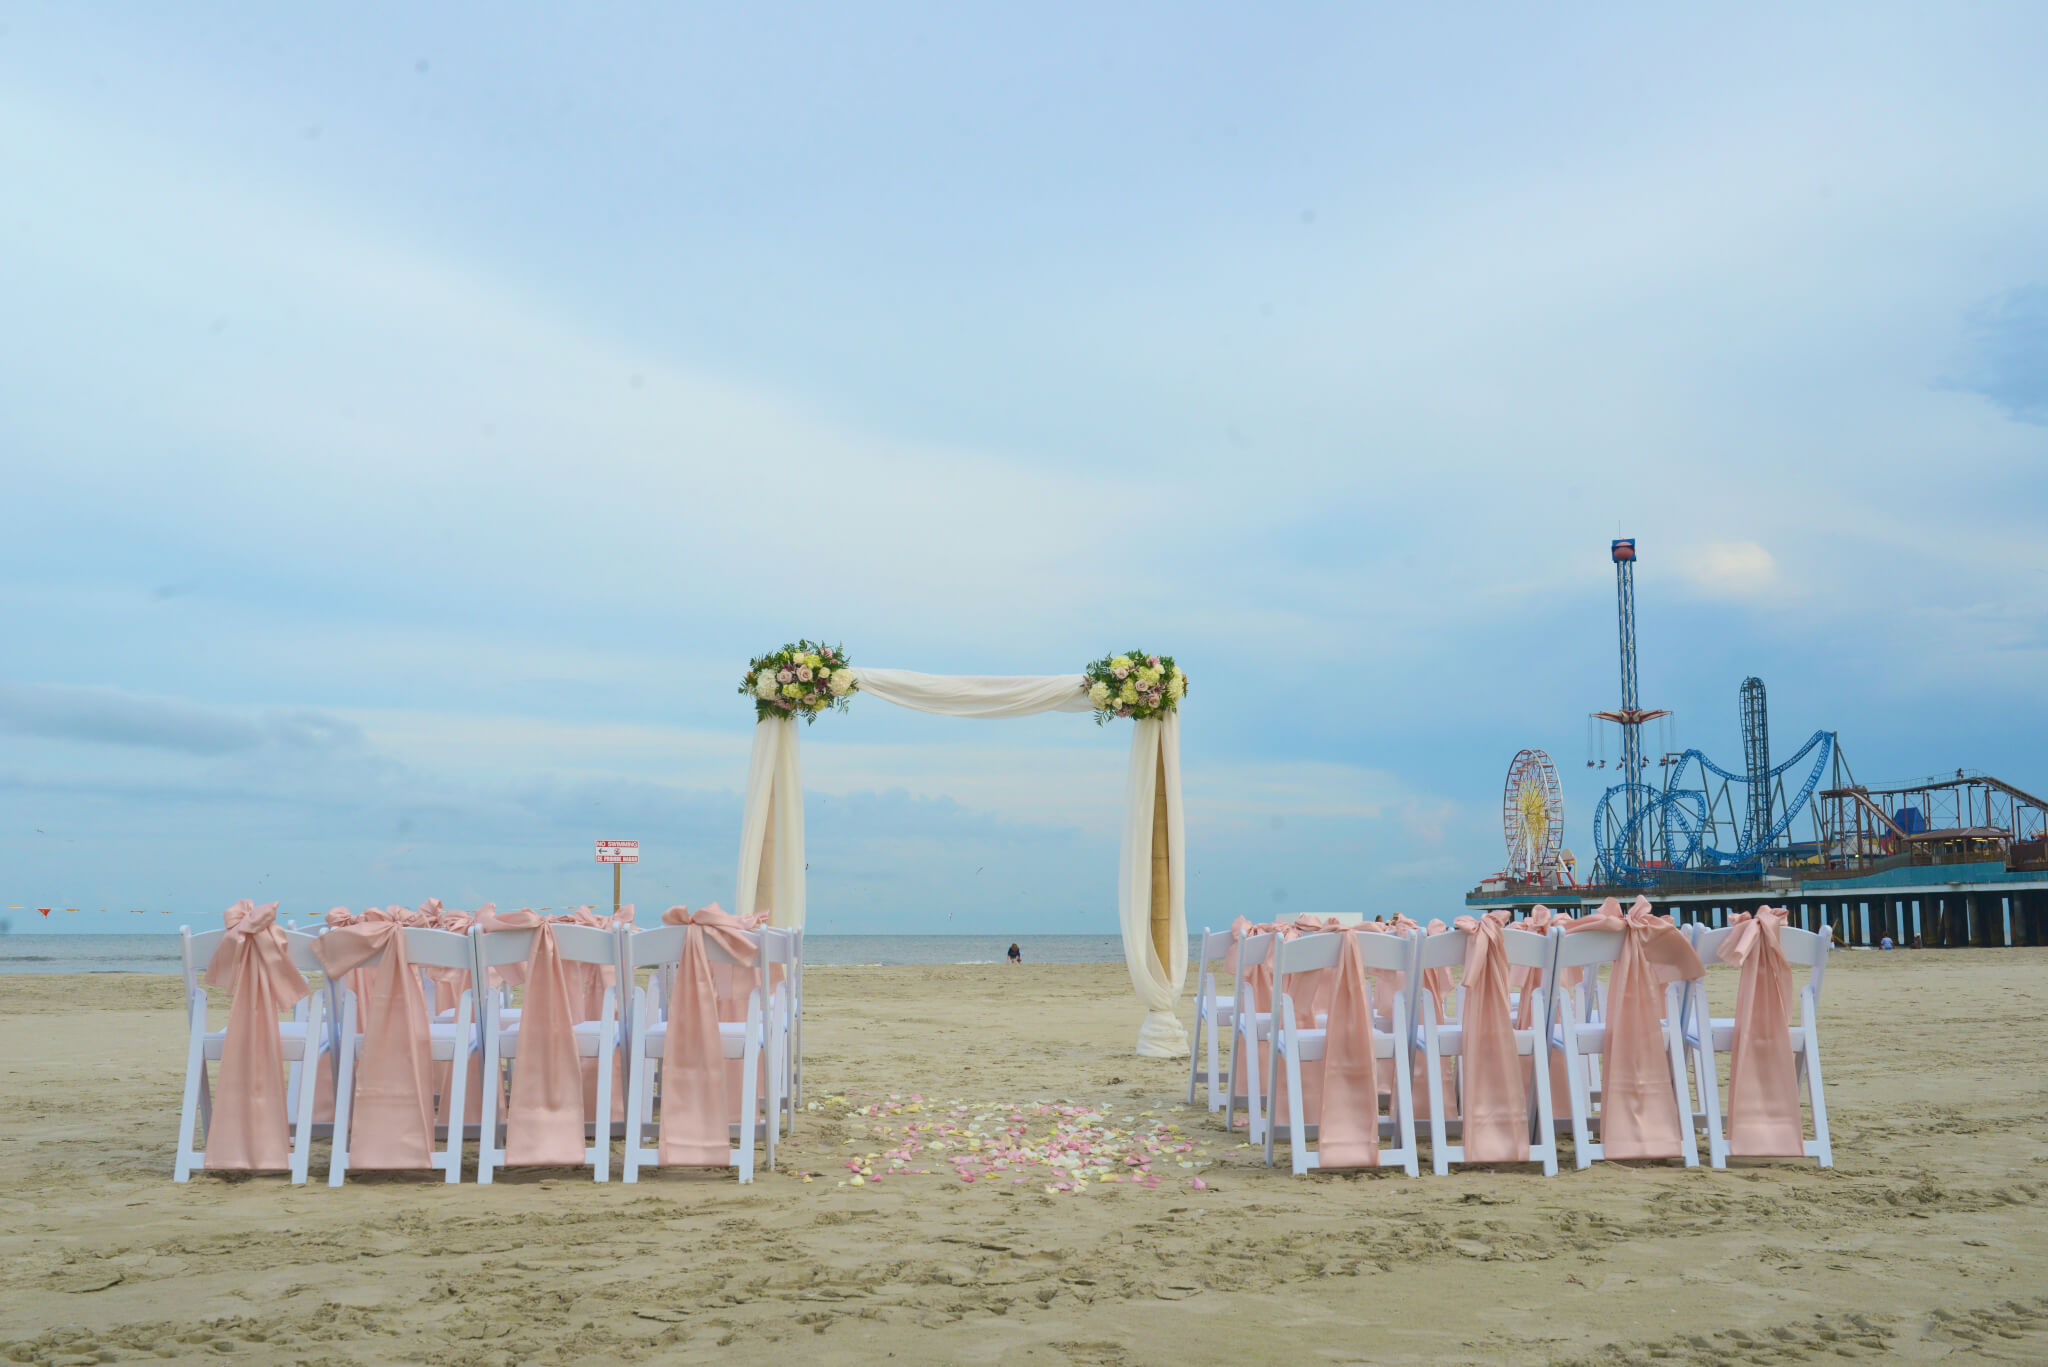 Galveston Intimate Wedding Setup – Bamboo Arch with Floral Accents